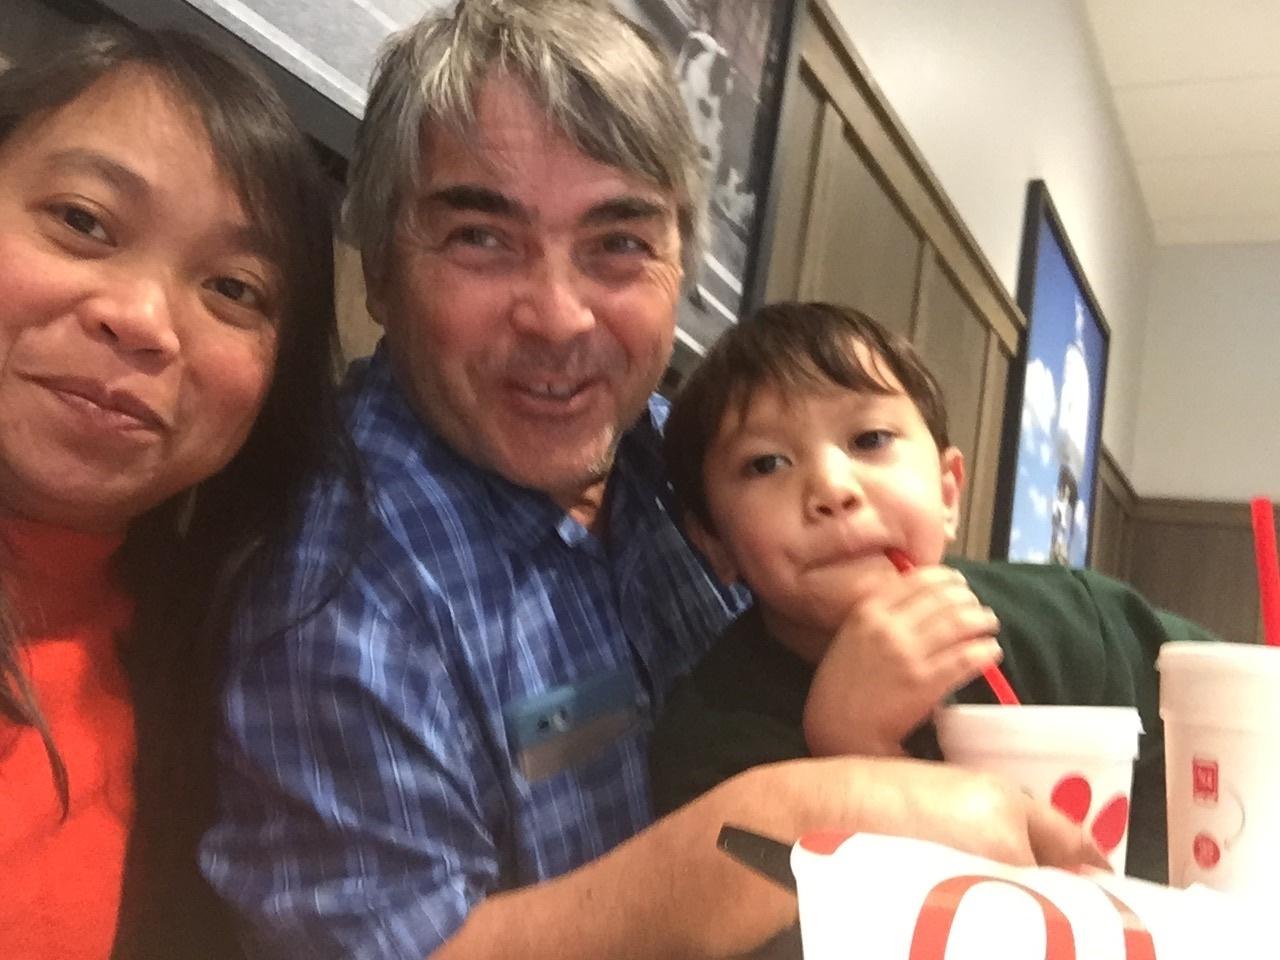 A mixed race couple enjoy a meal out with their son, at a restaurant